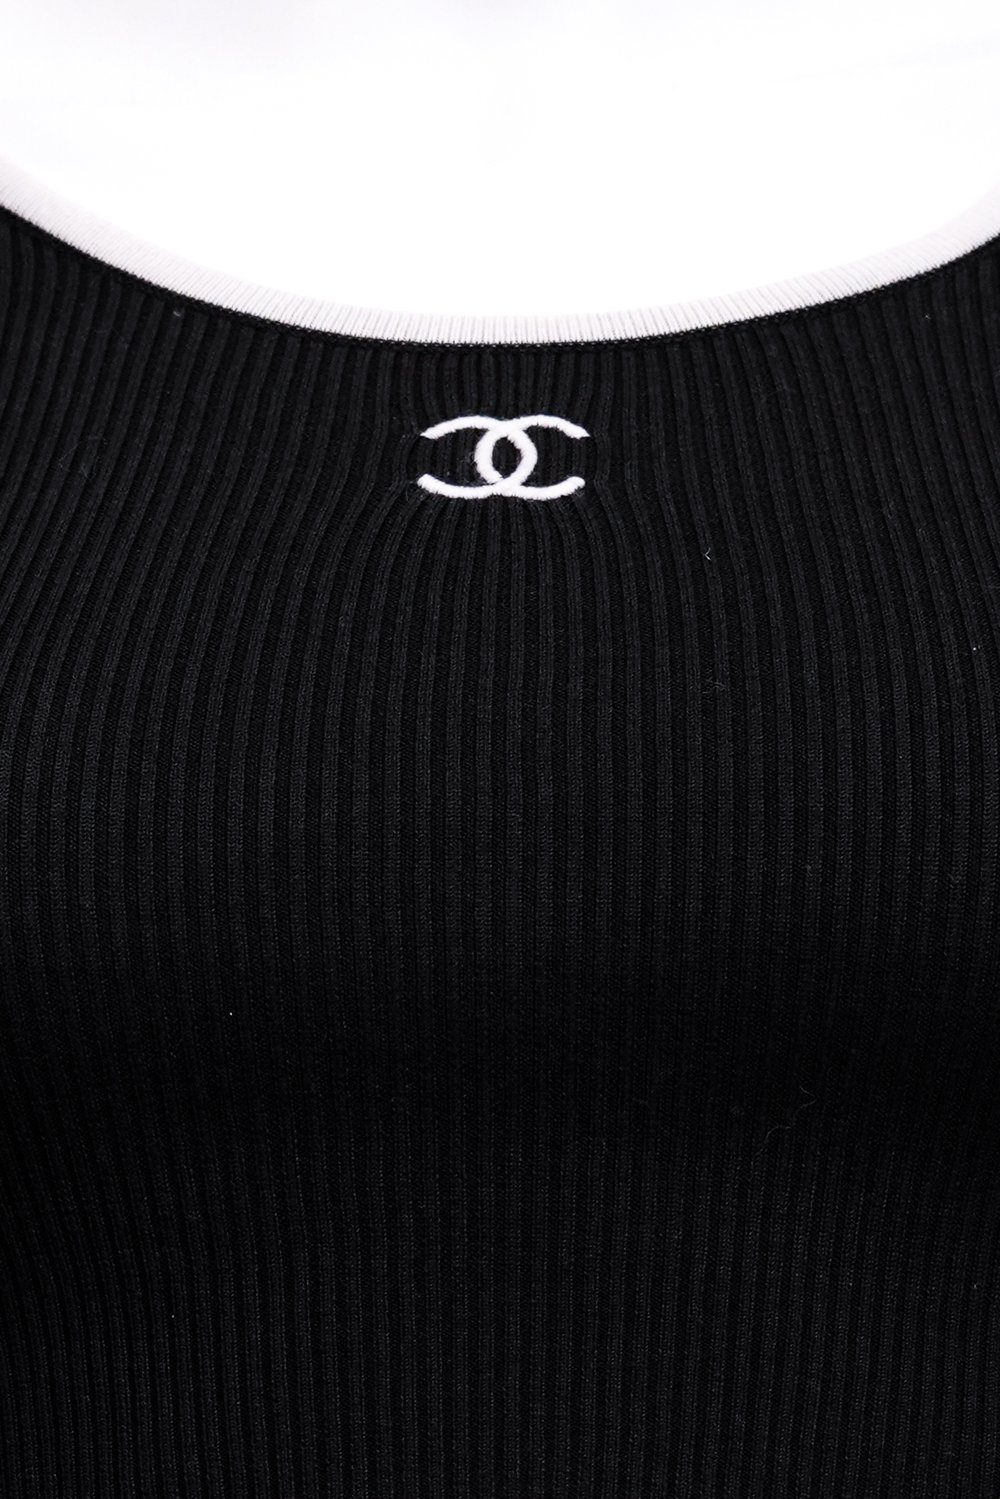 Chanel Red Terry Cloth Crop Top — God of Cloth